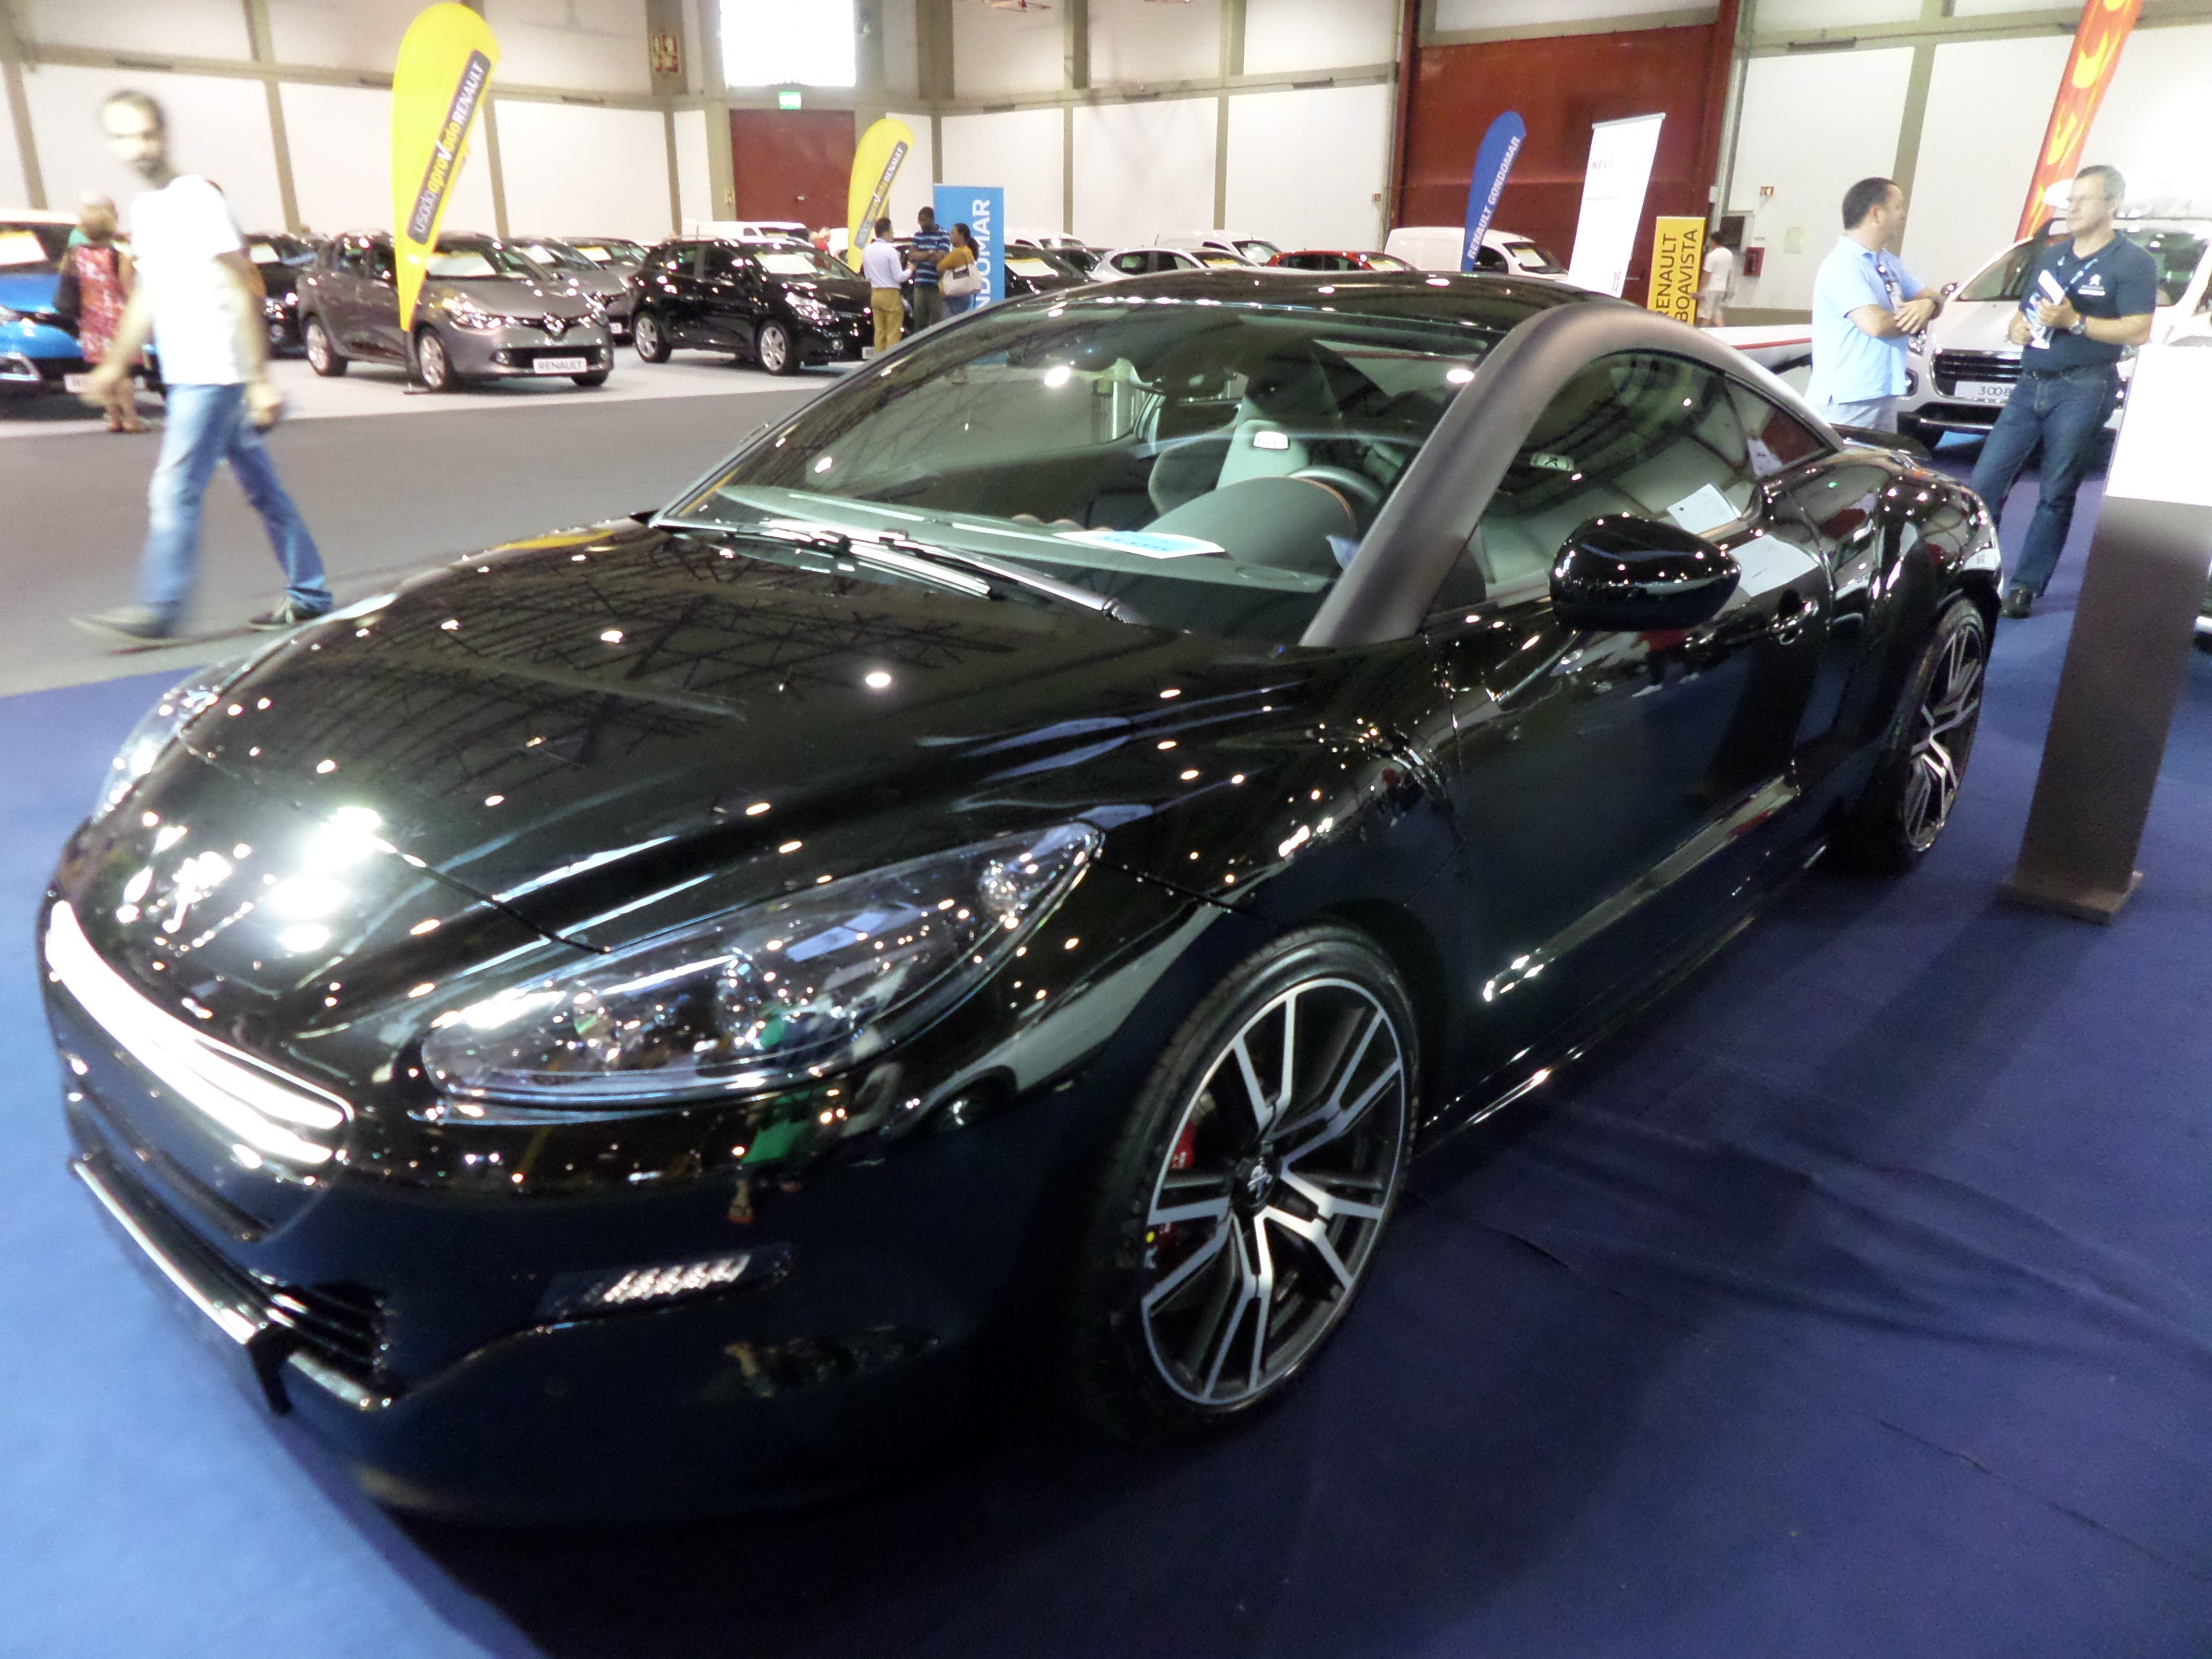 Peugeot RCZ R: It's like a RCZ, but better. And more edgy. And with more horsepower. And...